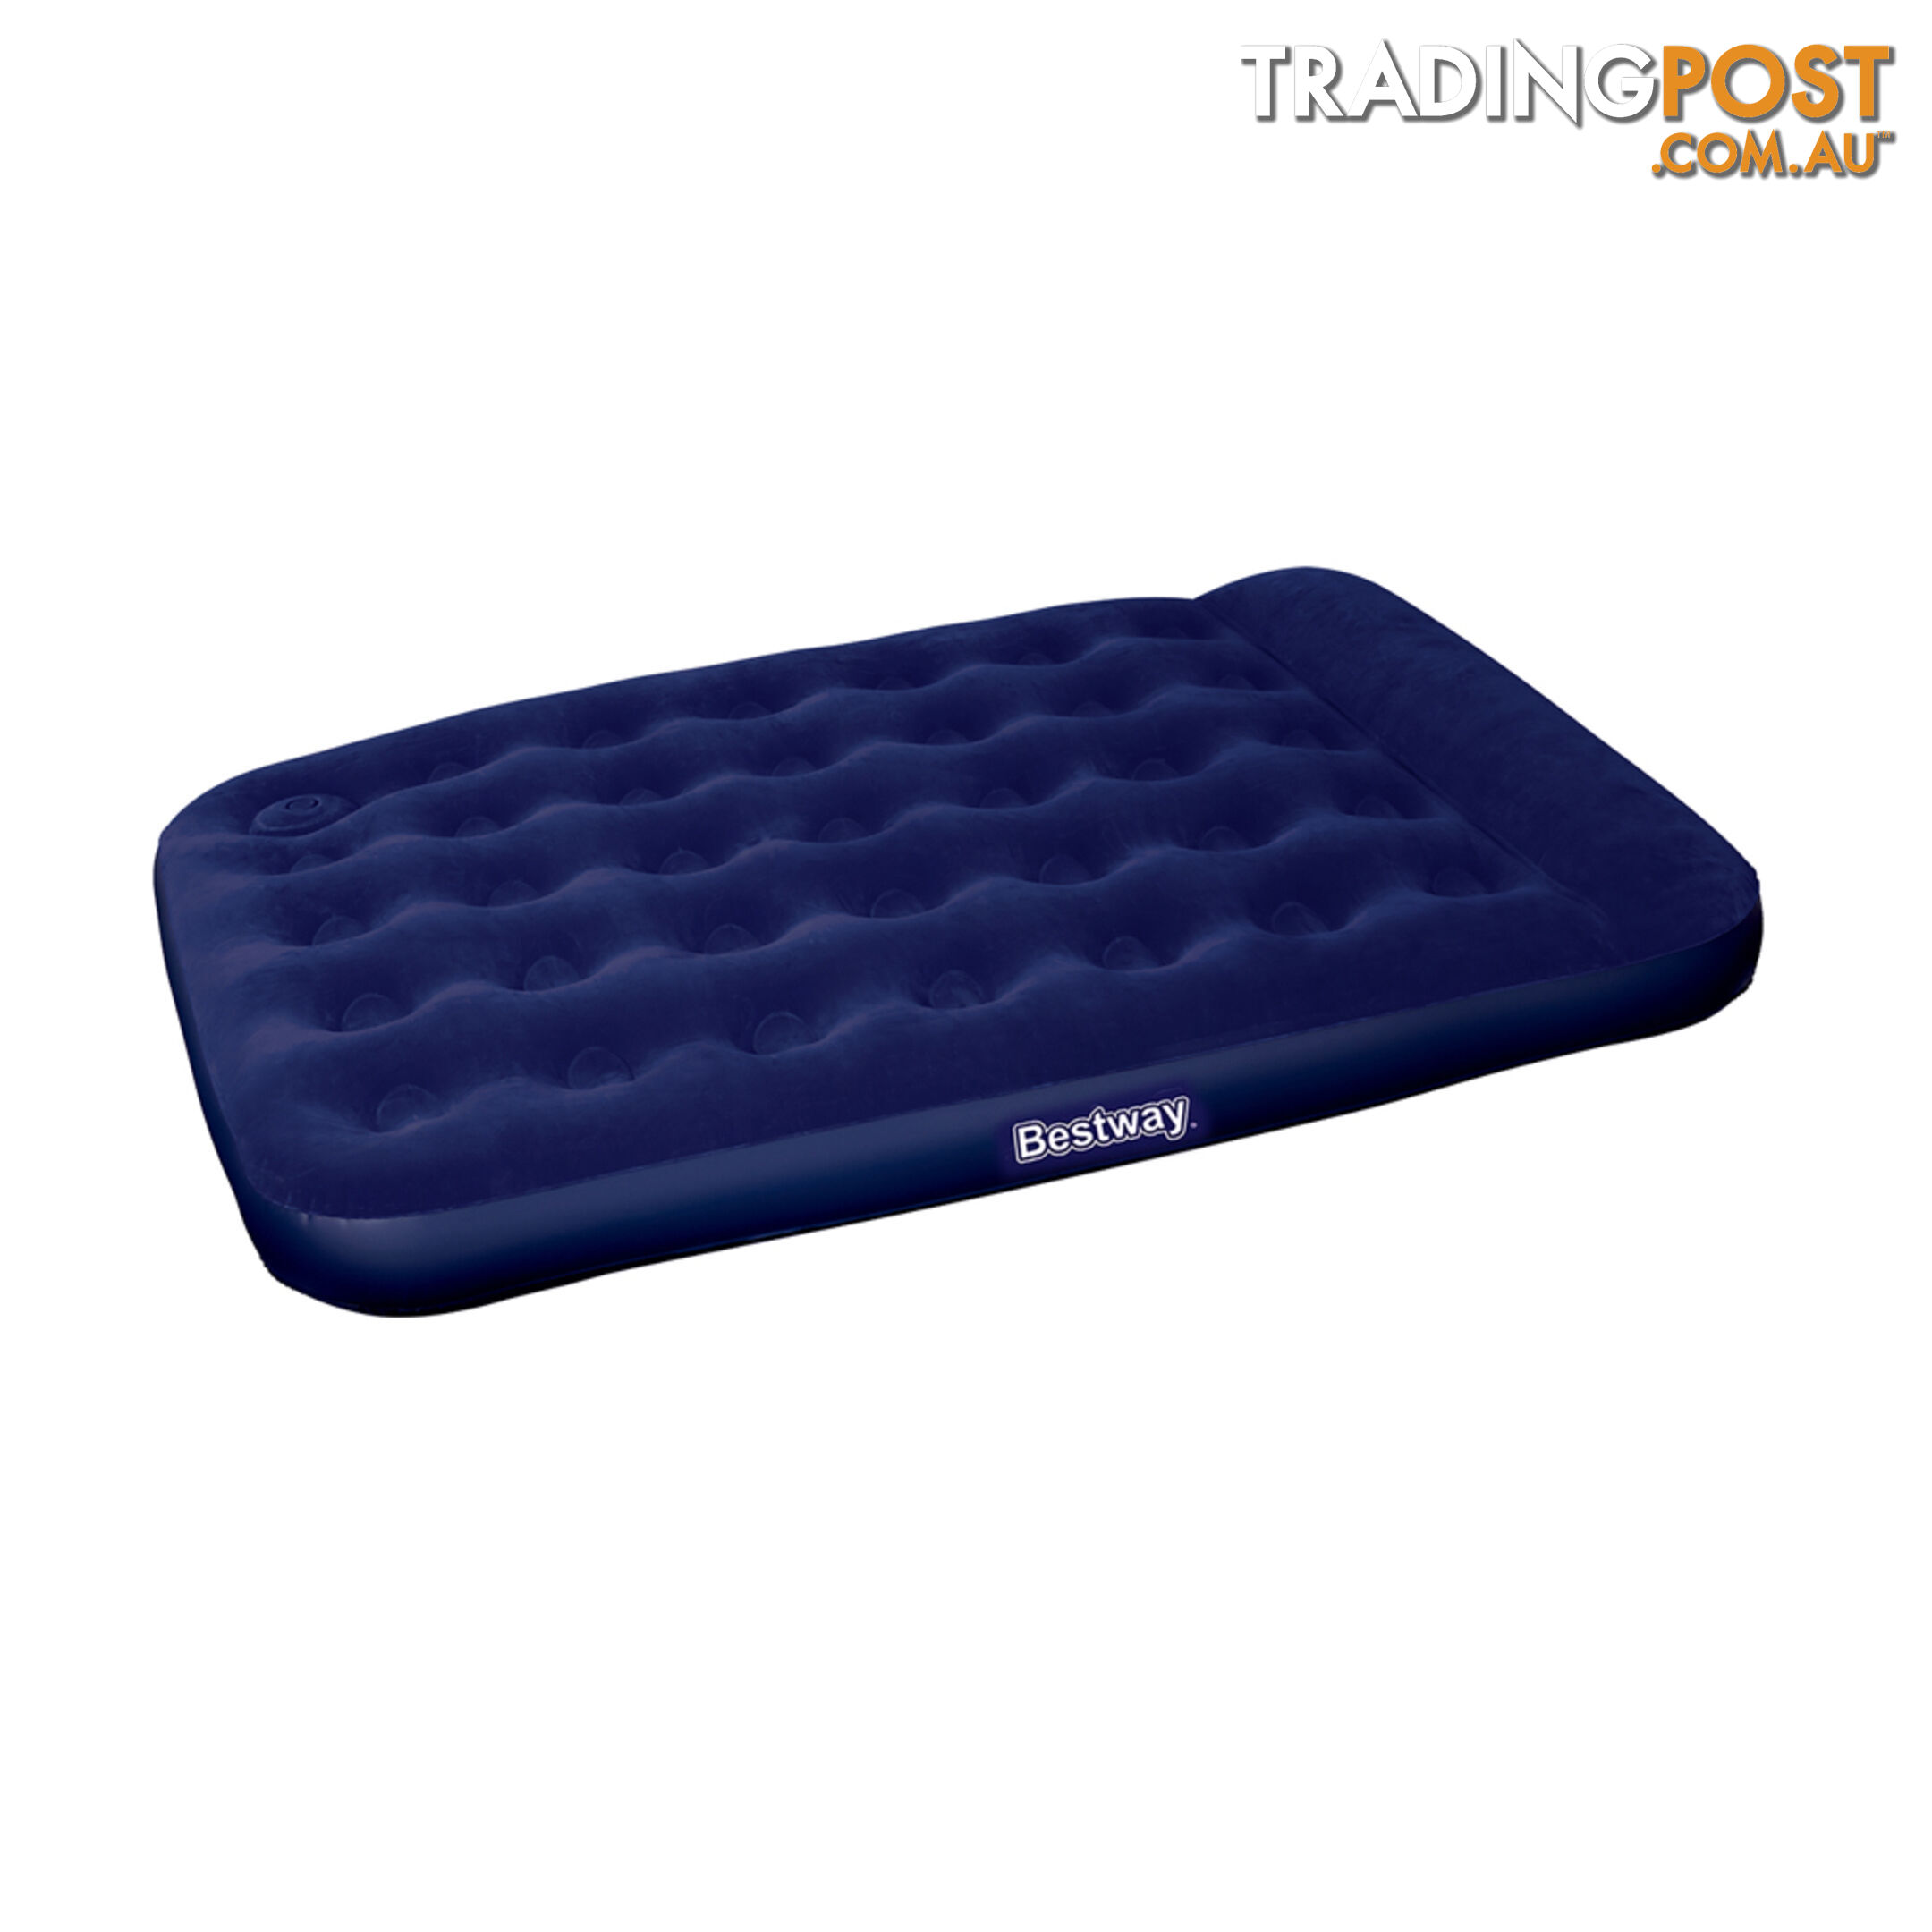 Bestway Double Inflatable Air Mattress Bed w/ Built-in Foot Pump Blue